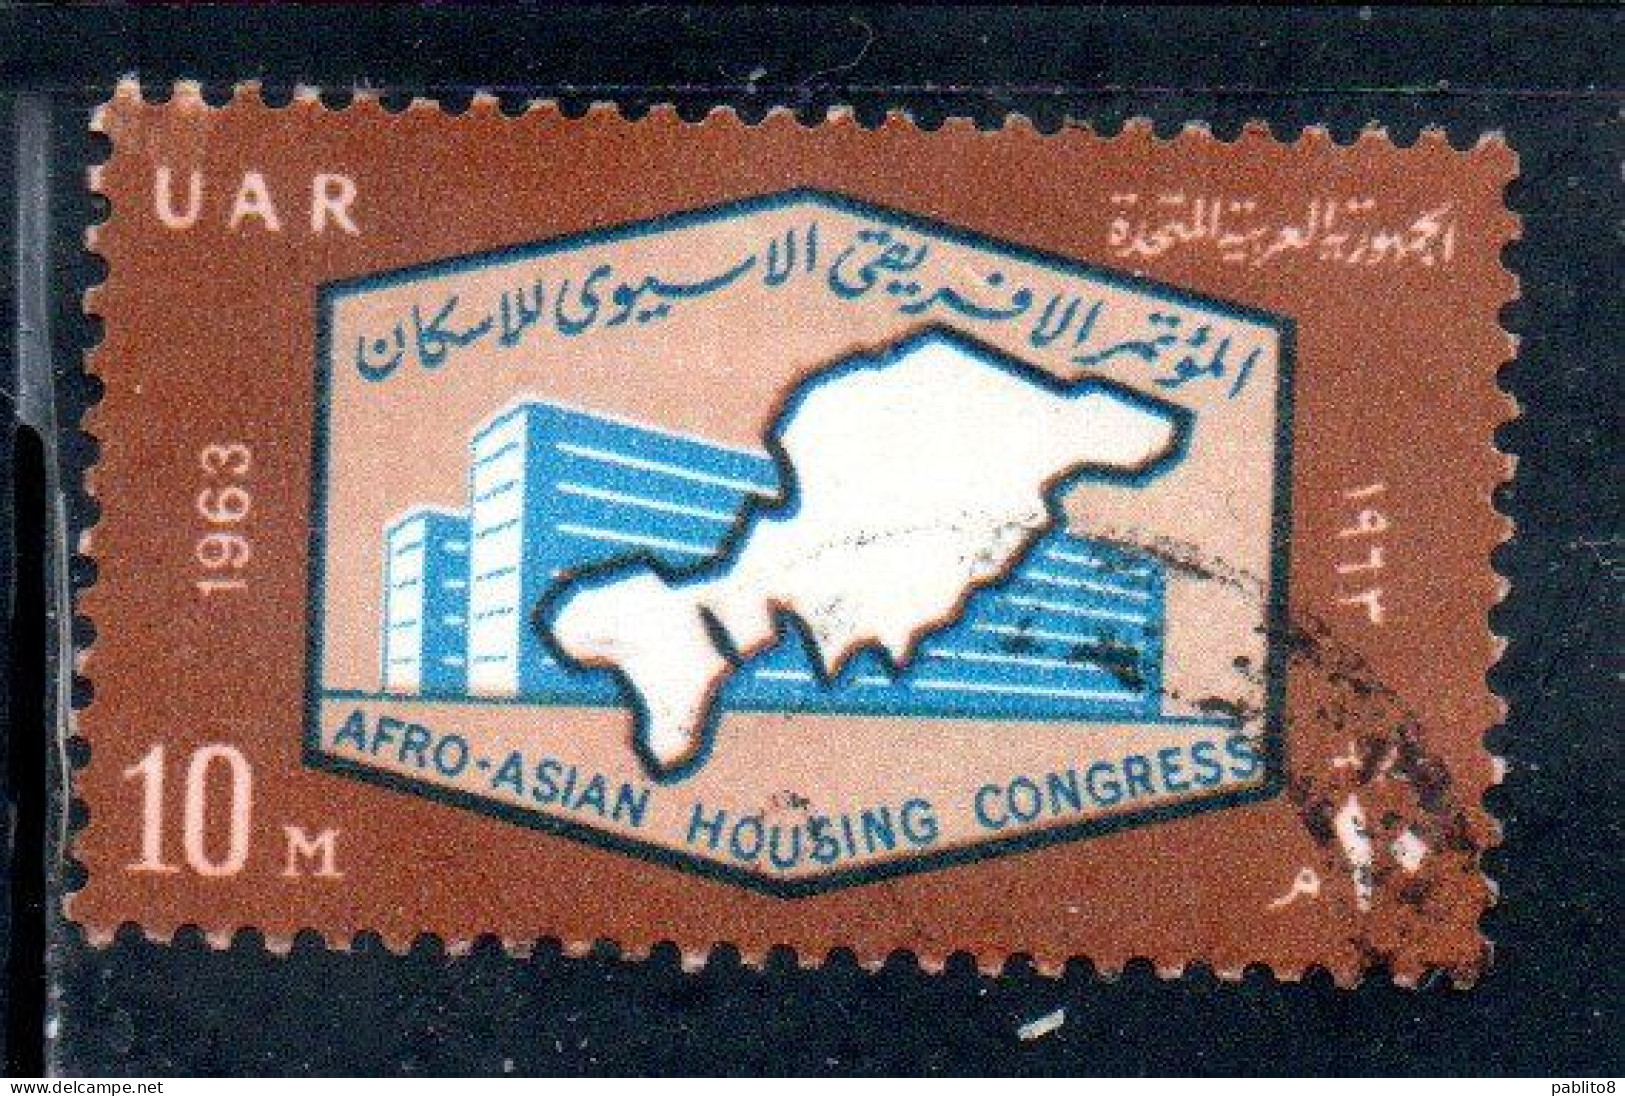 UAR EGYPT EGITTO 1963 AFRO-ASIAN HOUSING CONGRESS MODERN BUILDING AND MAP 10m  USED USATO OBLITERE' - Usados